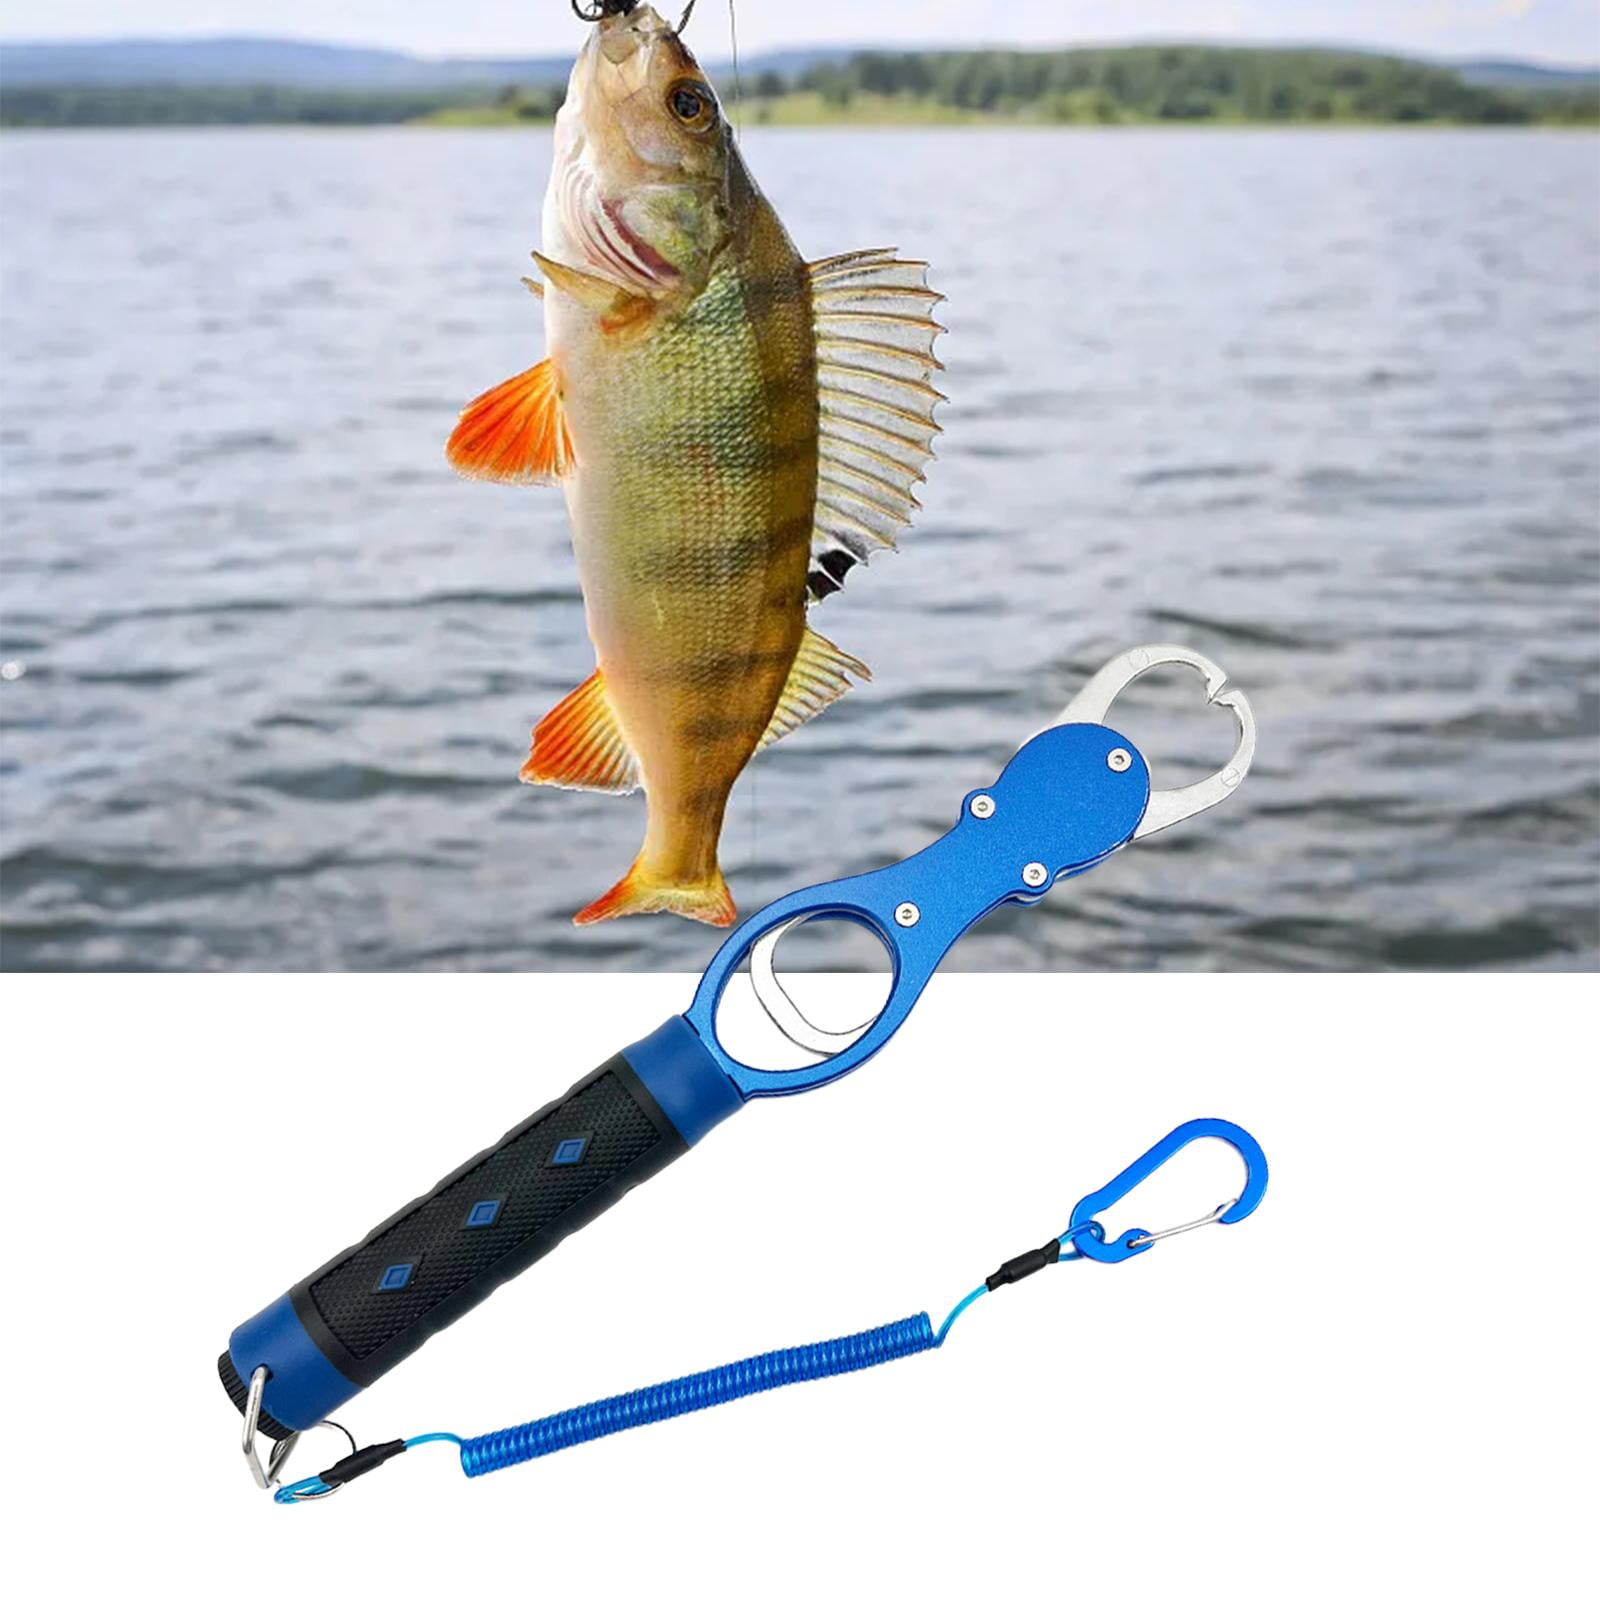 Piscifun Fish Lip Gripper with Digital Scale, Water-Resistant Lip Grip with  Electronic Digital Scale, Fish Grabber Stainless Steel Clip Fish Control  Black